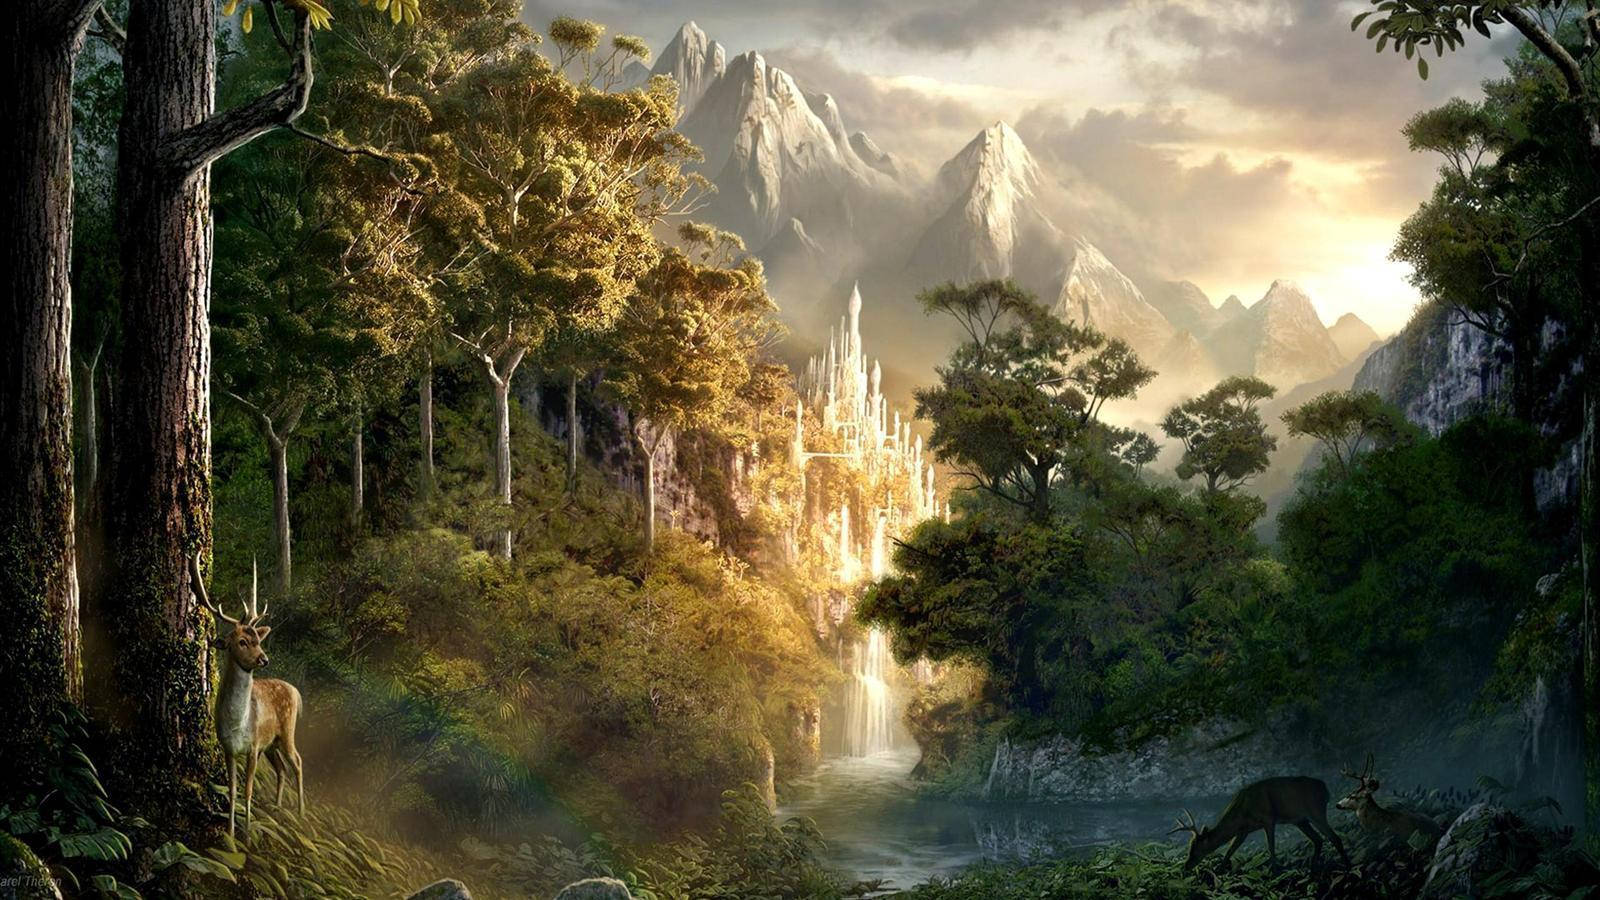 A Fantasy Scene With A Waterfall And Trees Background